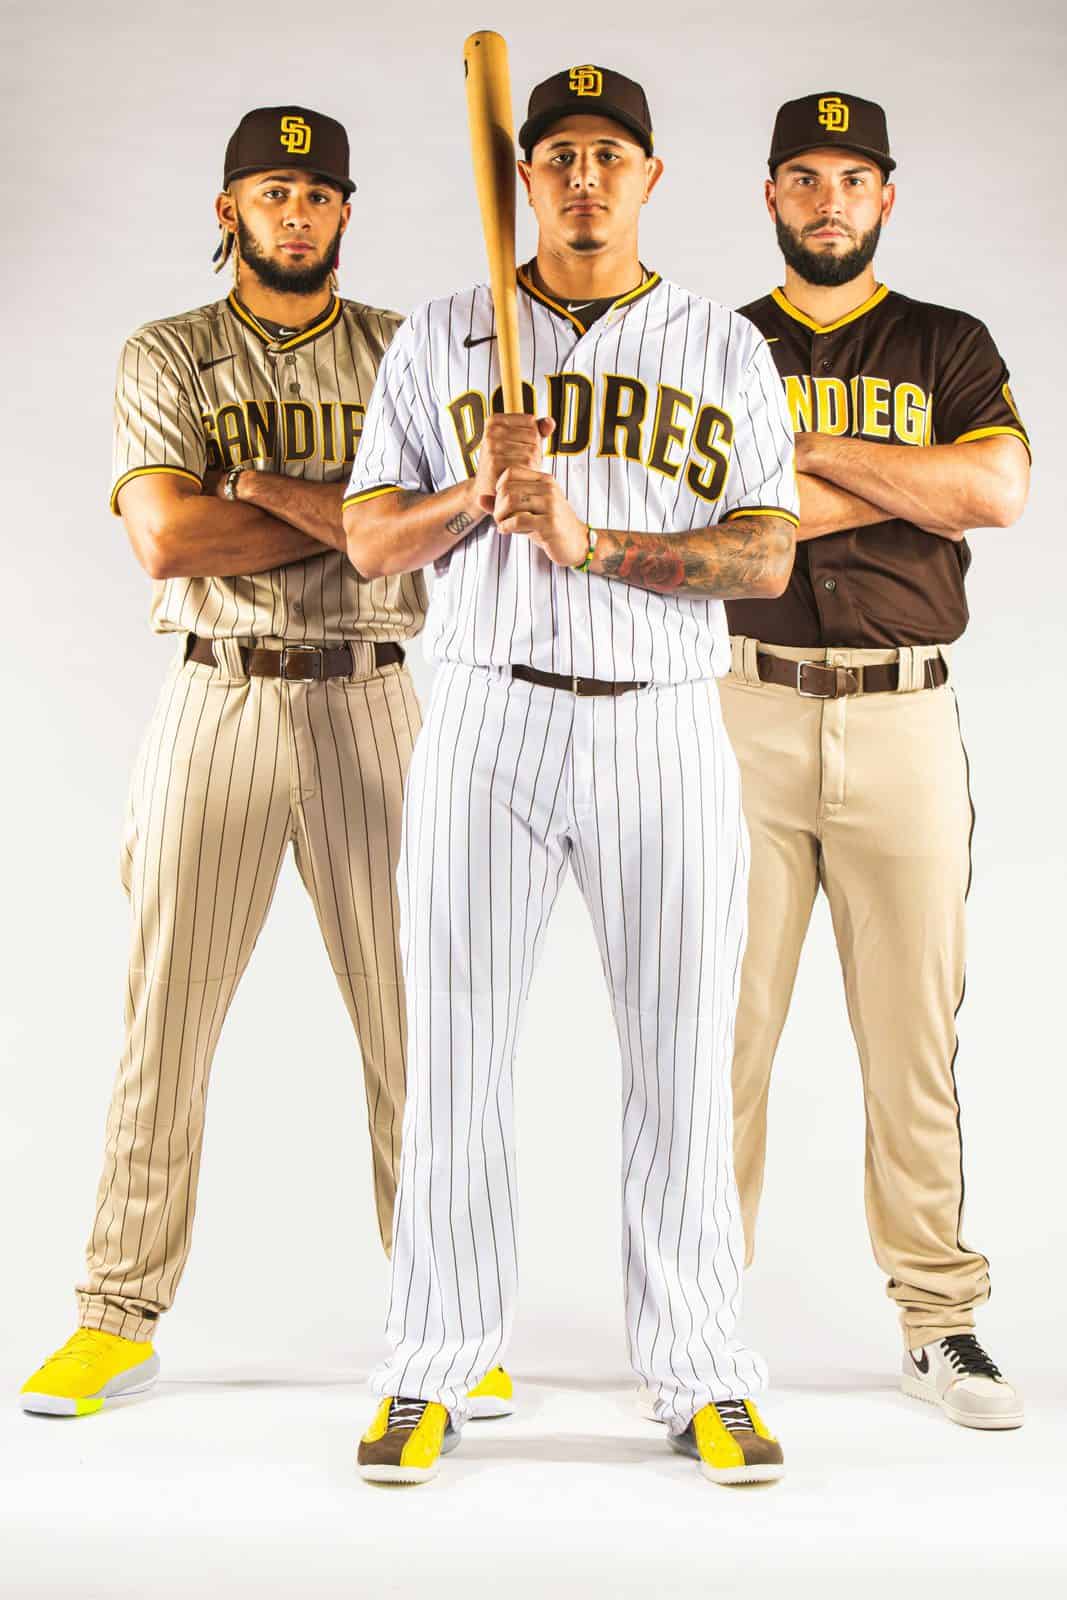 brown and yellow padres jersey